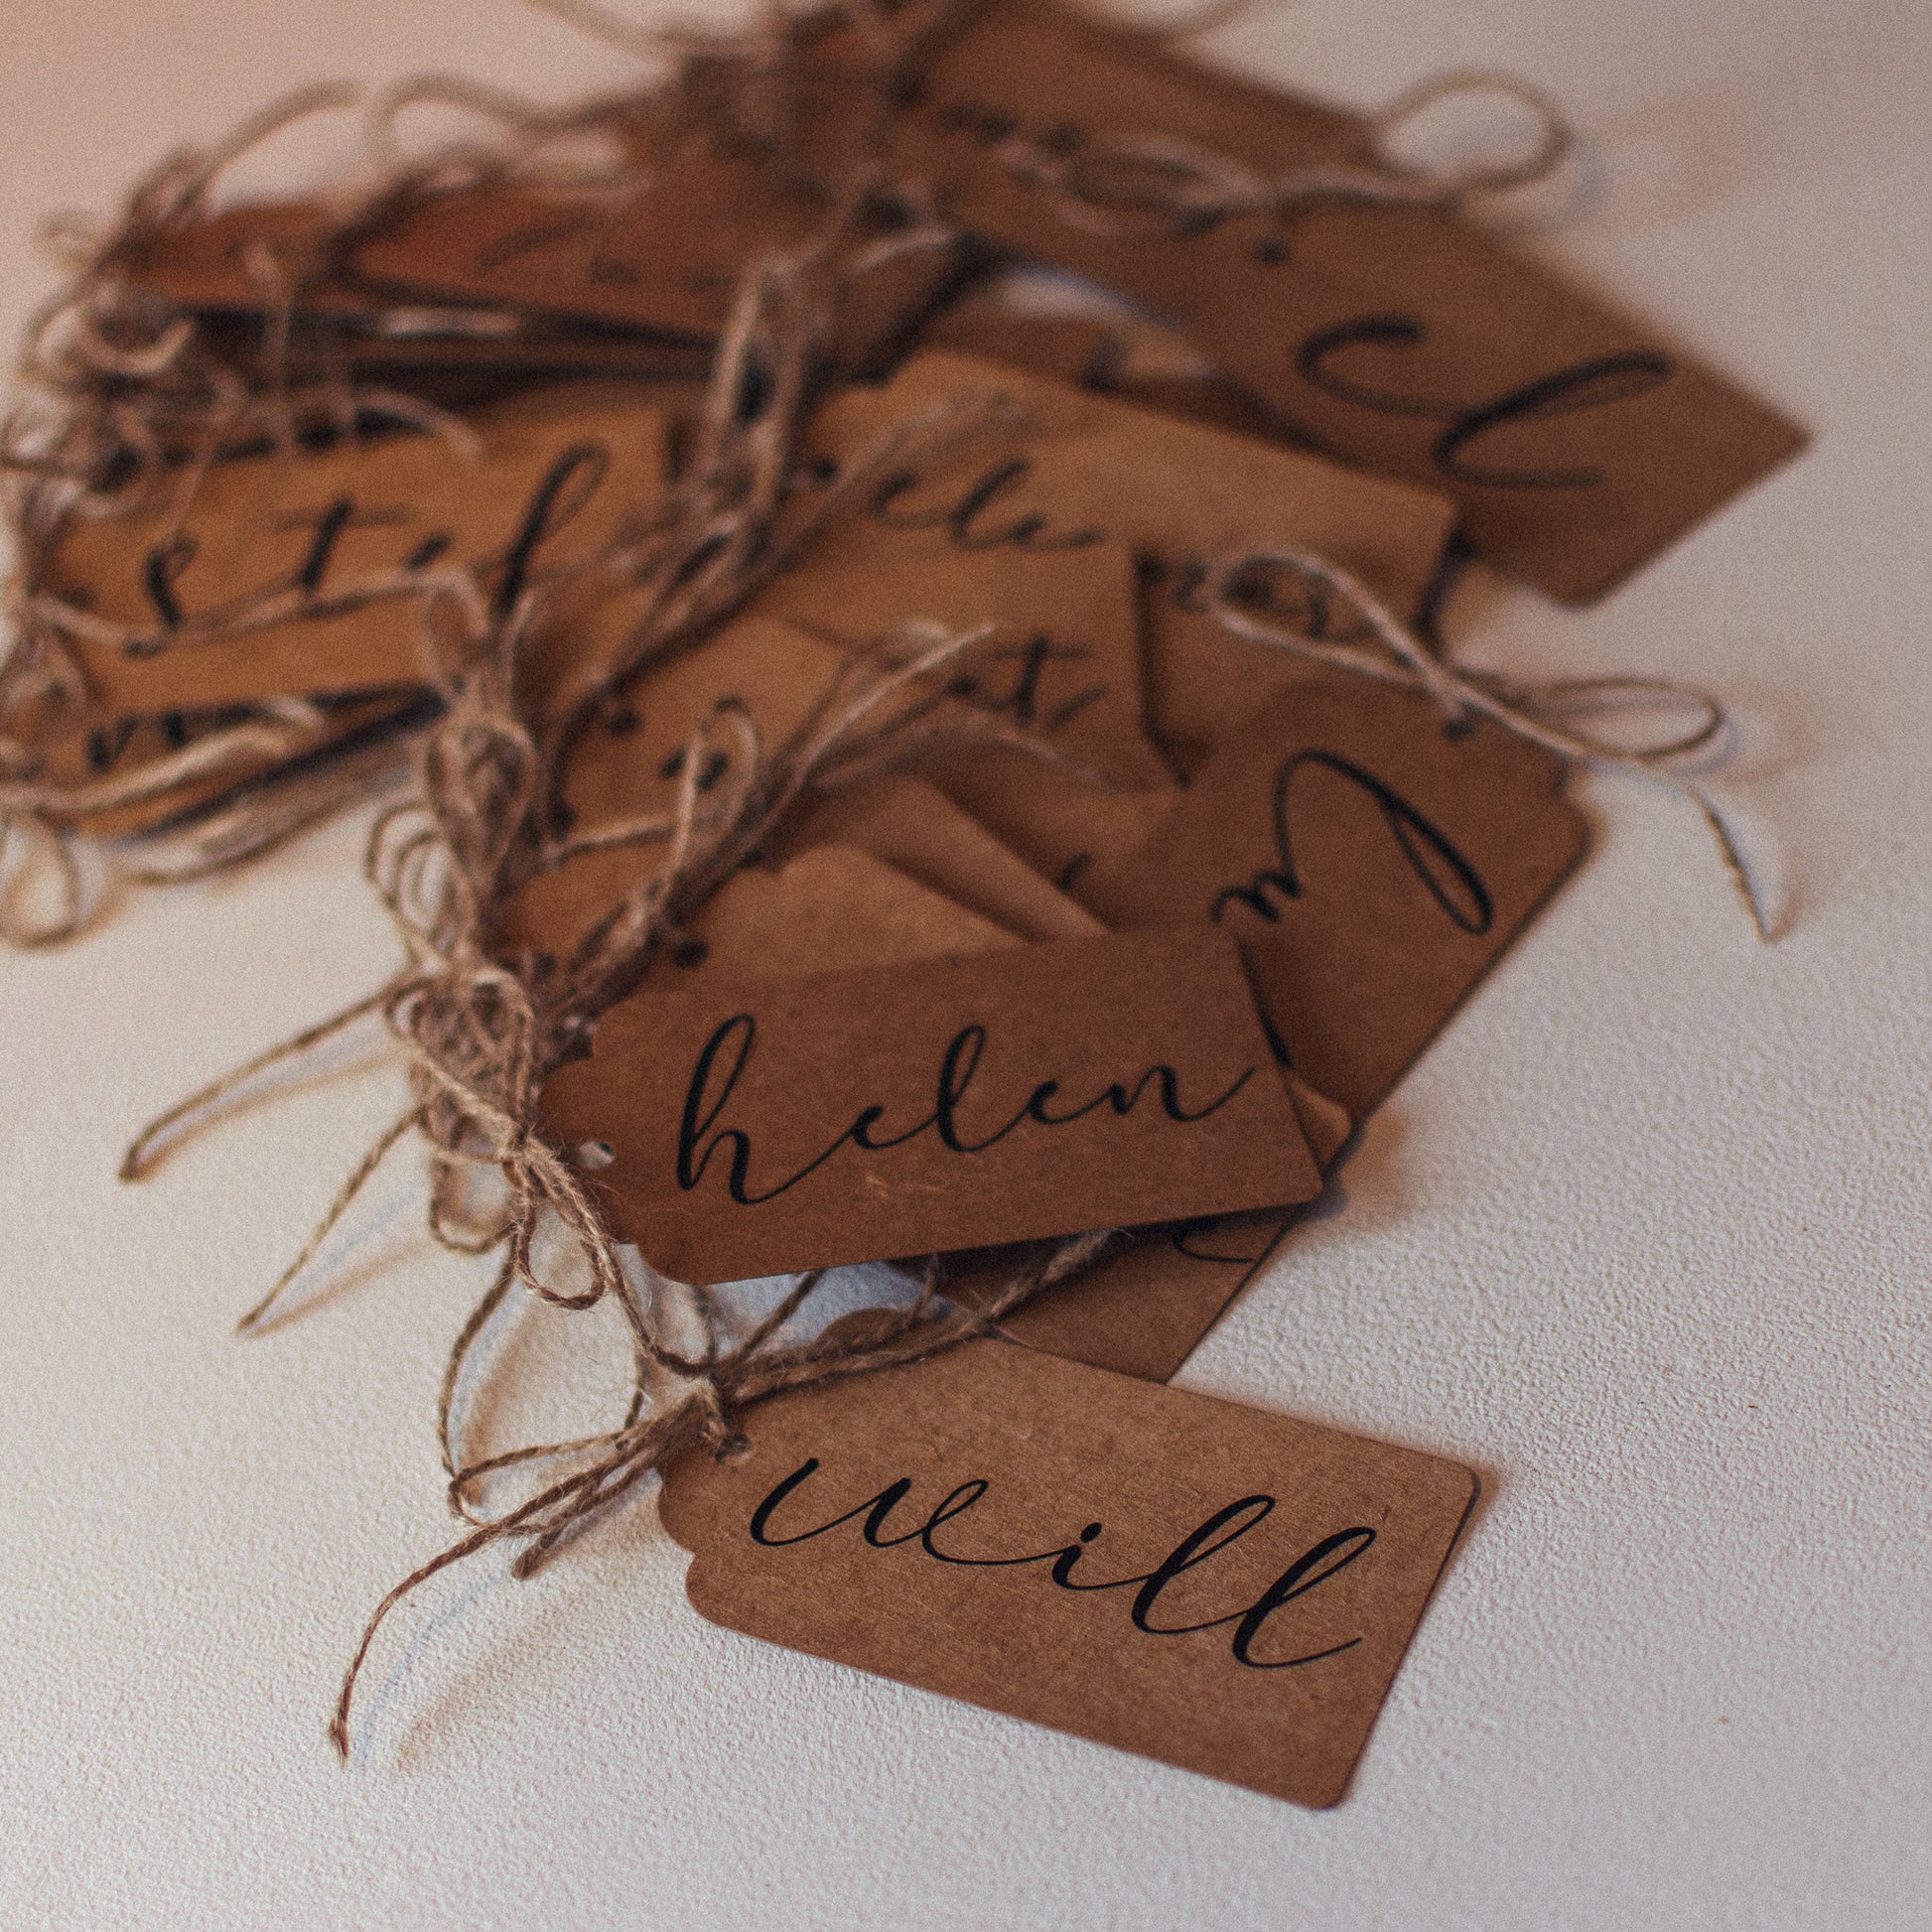 Helen and Will Rustic Wedding Decorations - Place Names - Craft Card and Twine